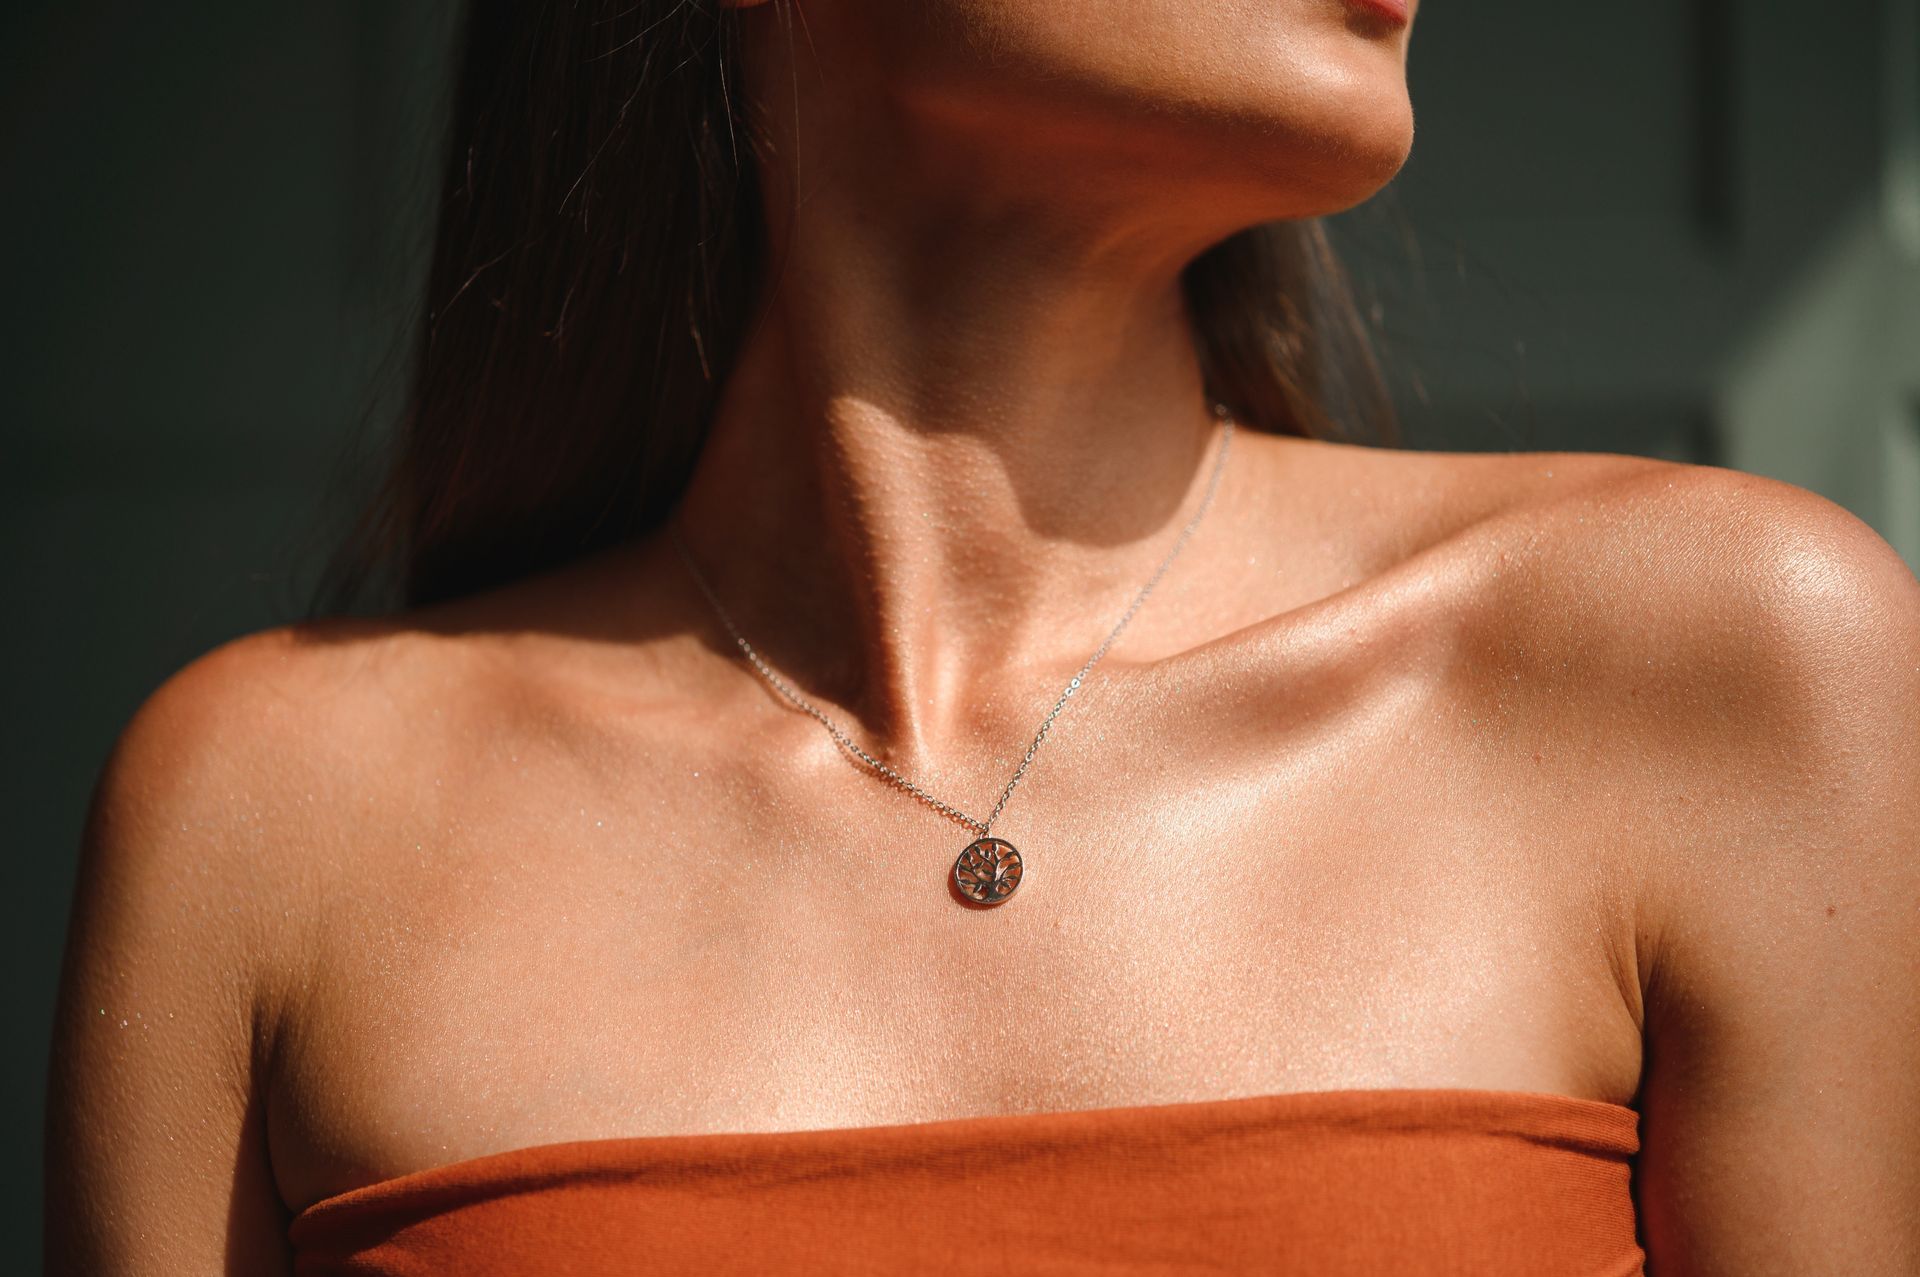 a woman wearing a necklace with a coin on it